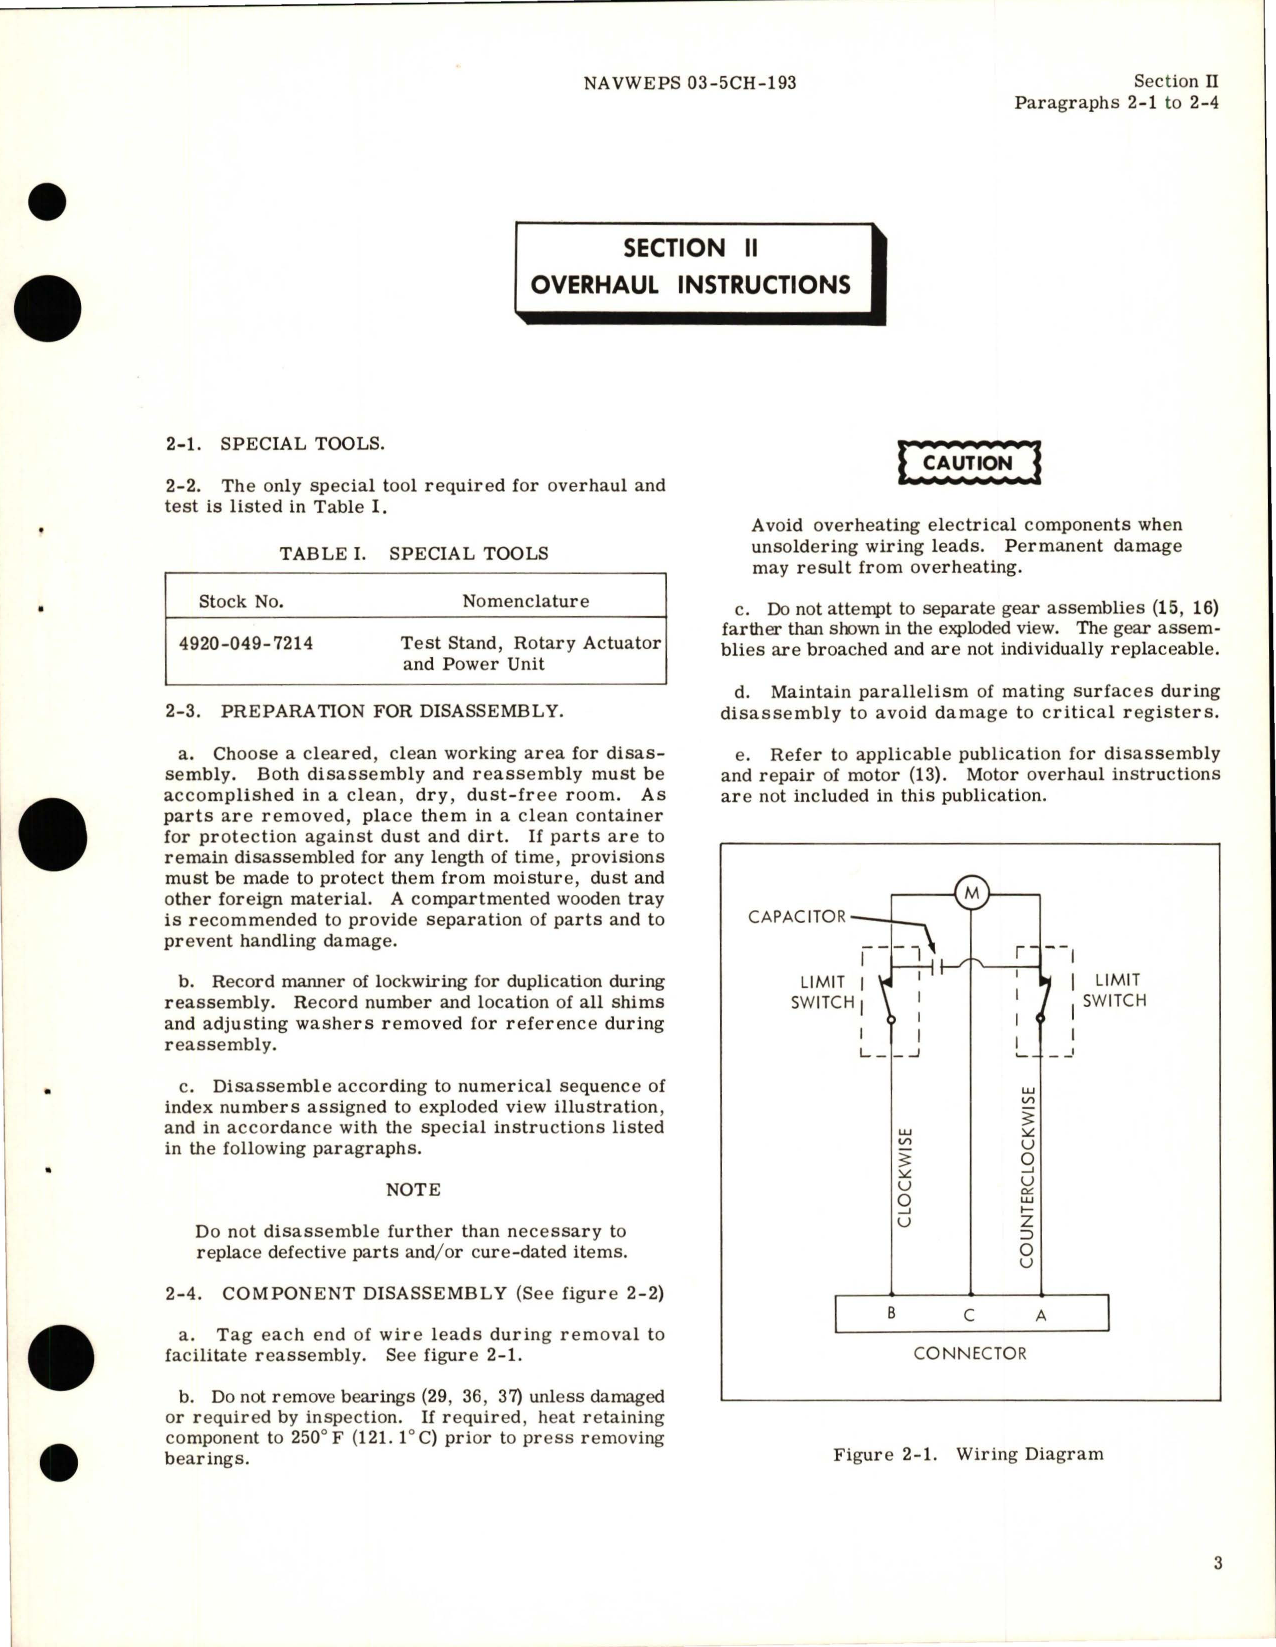 Sample page 7 from AirCorps Library document: Overhaul Instructions for Electromechanical Rotary Actuators - Parts 700300 and C10031